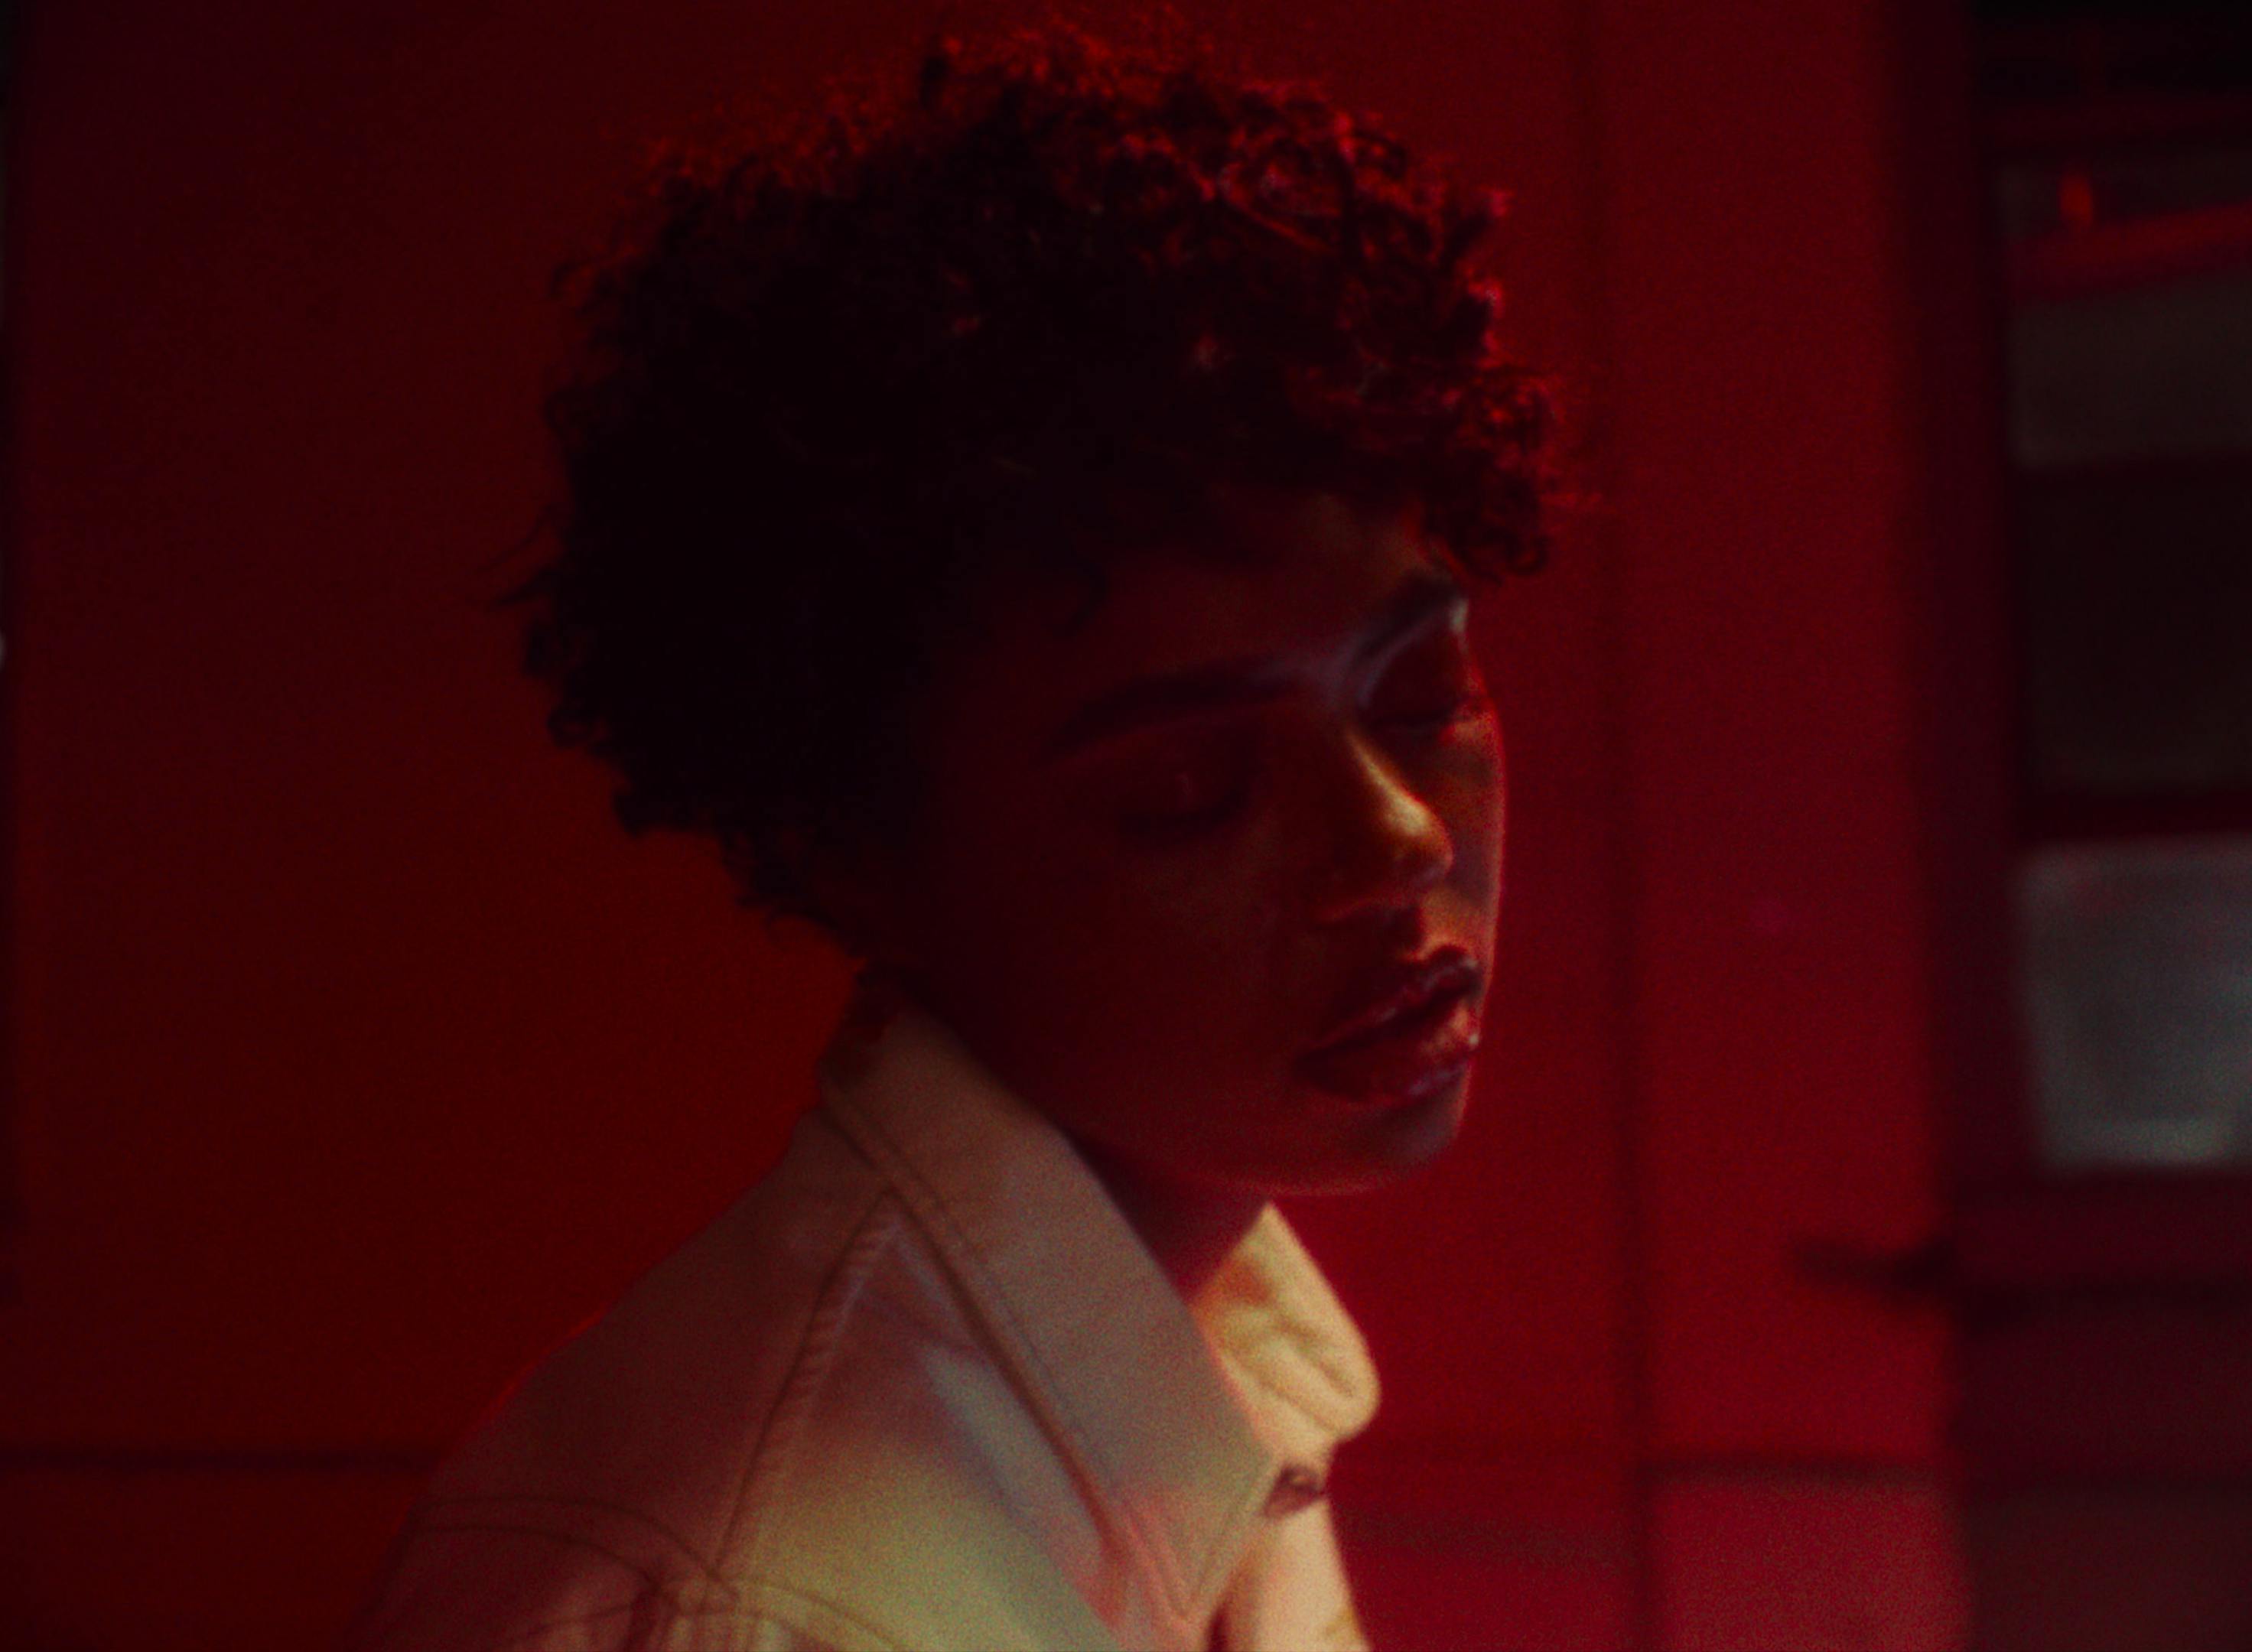 A still from Samaria's music video 'Out The Way' depicts a woman in a contemplative state. The scene is bathed in a red hue, casting dramatic shadows on her face and highlighting her short curly hair. She's wearing a white jacket, and her profile is captured against a darker, blurred background, adding a sense of depth and introspection to the image. Her expression is somber and thoughtful, resonating with the emotional tone of the song.